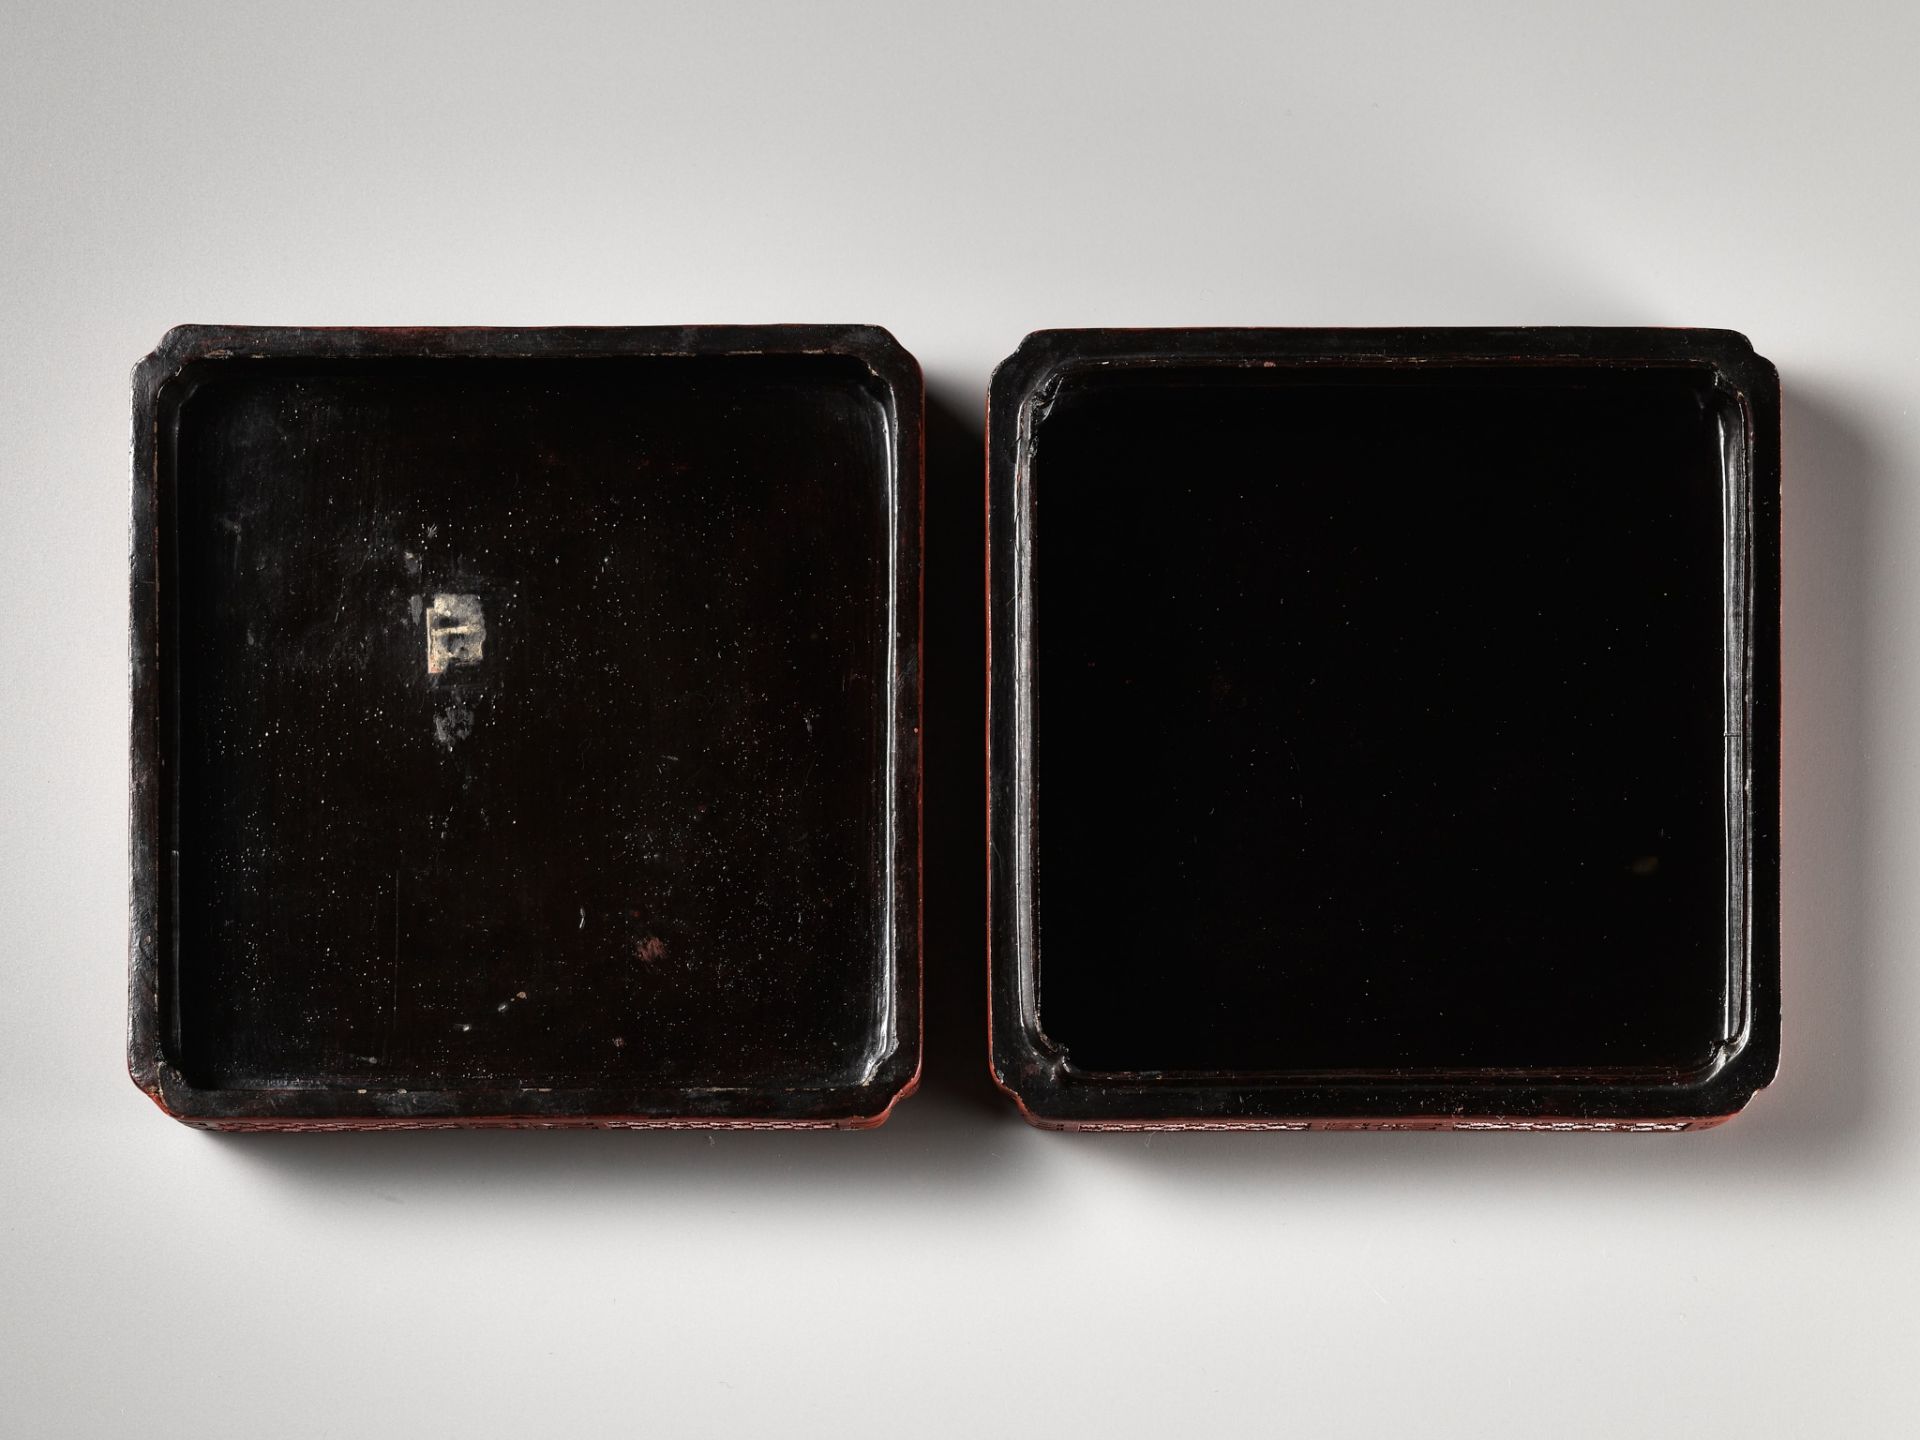 A SQUARE THREE-COLOR LACQUER 'CHUN' SPRING BOX AND COVER, QING DYNASTY - Image 10 of 11